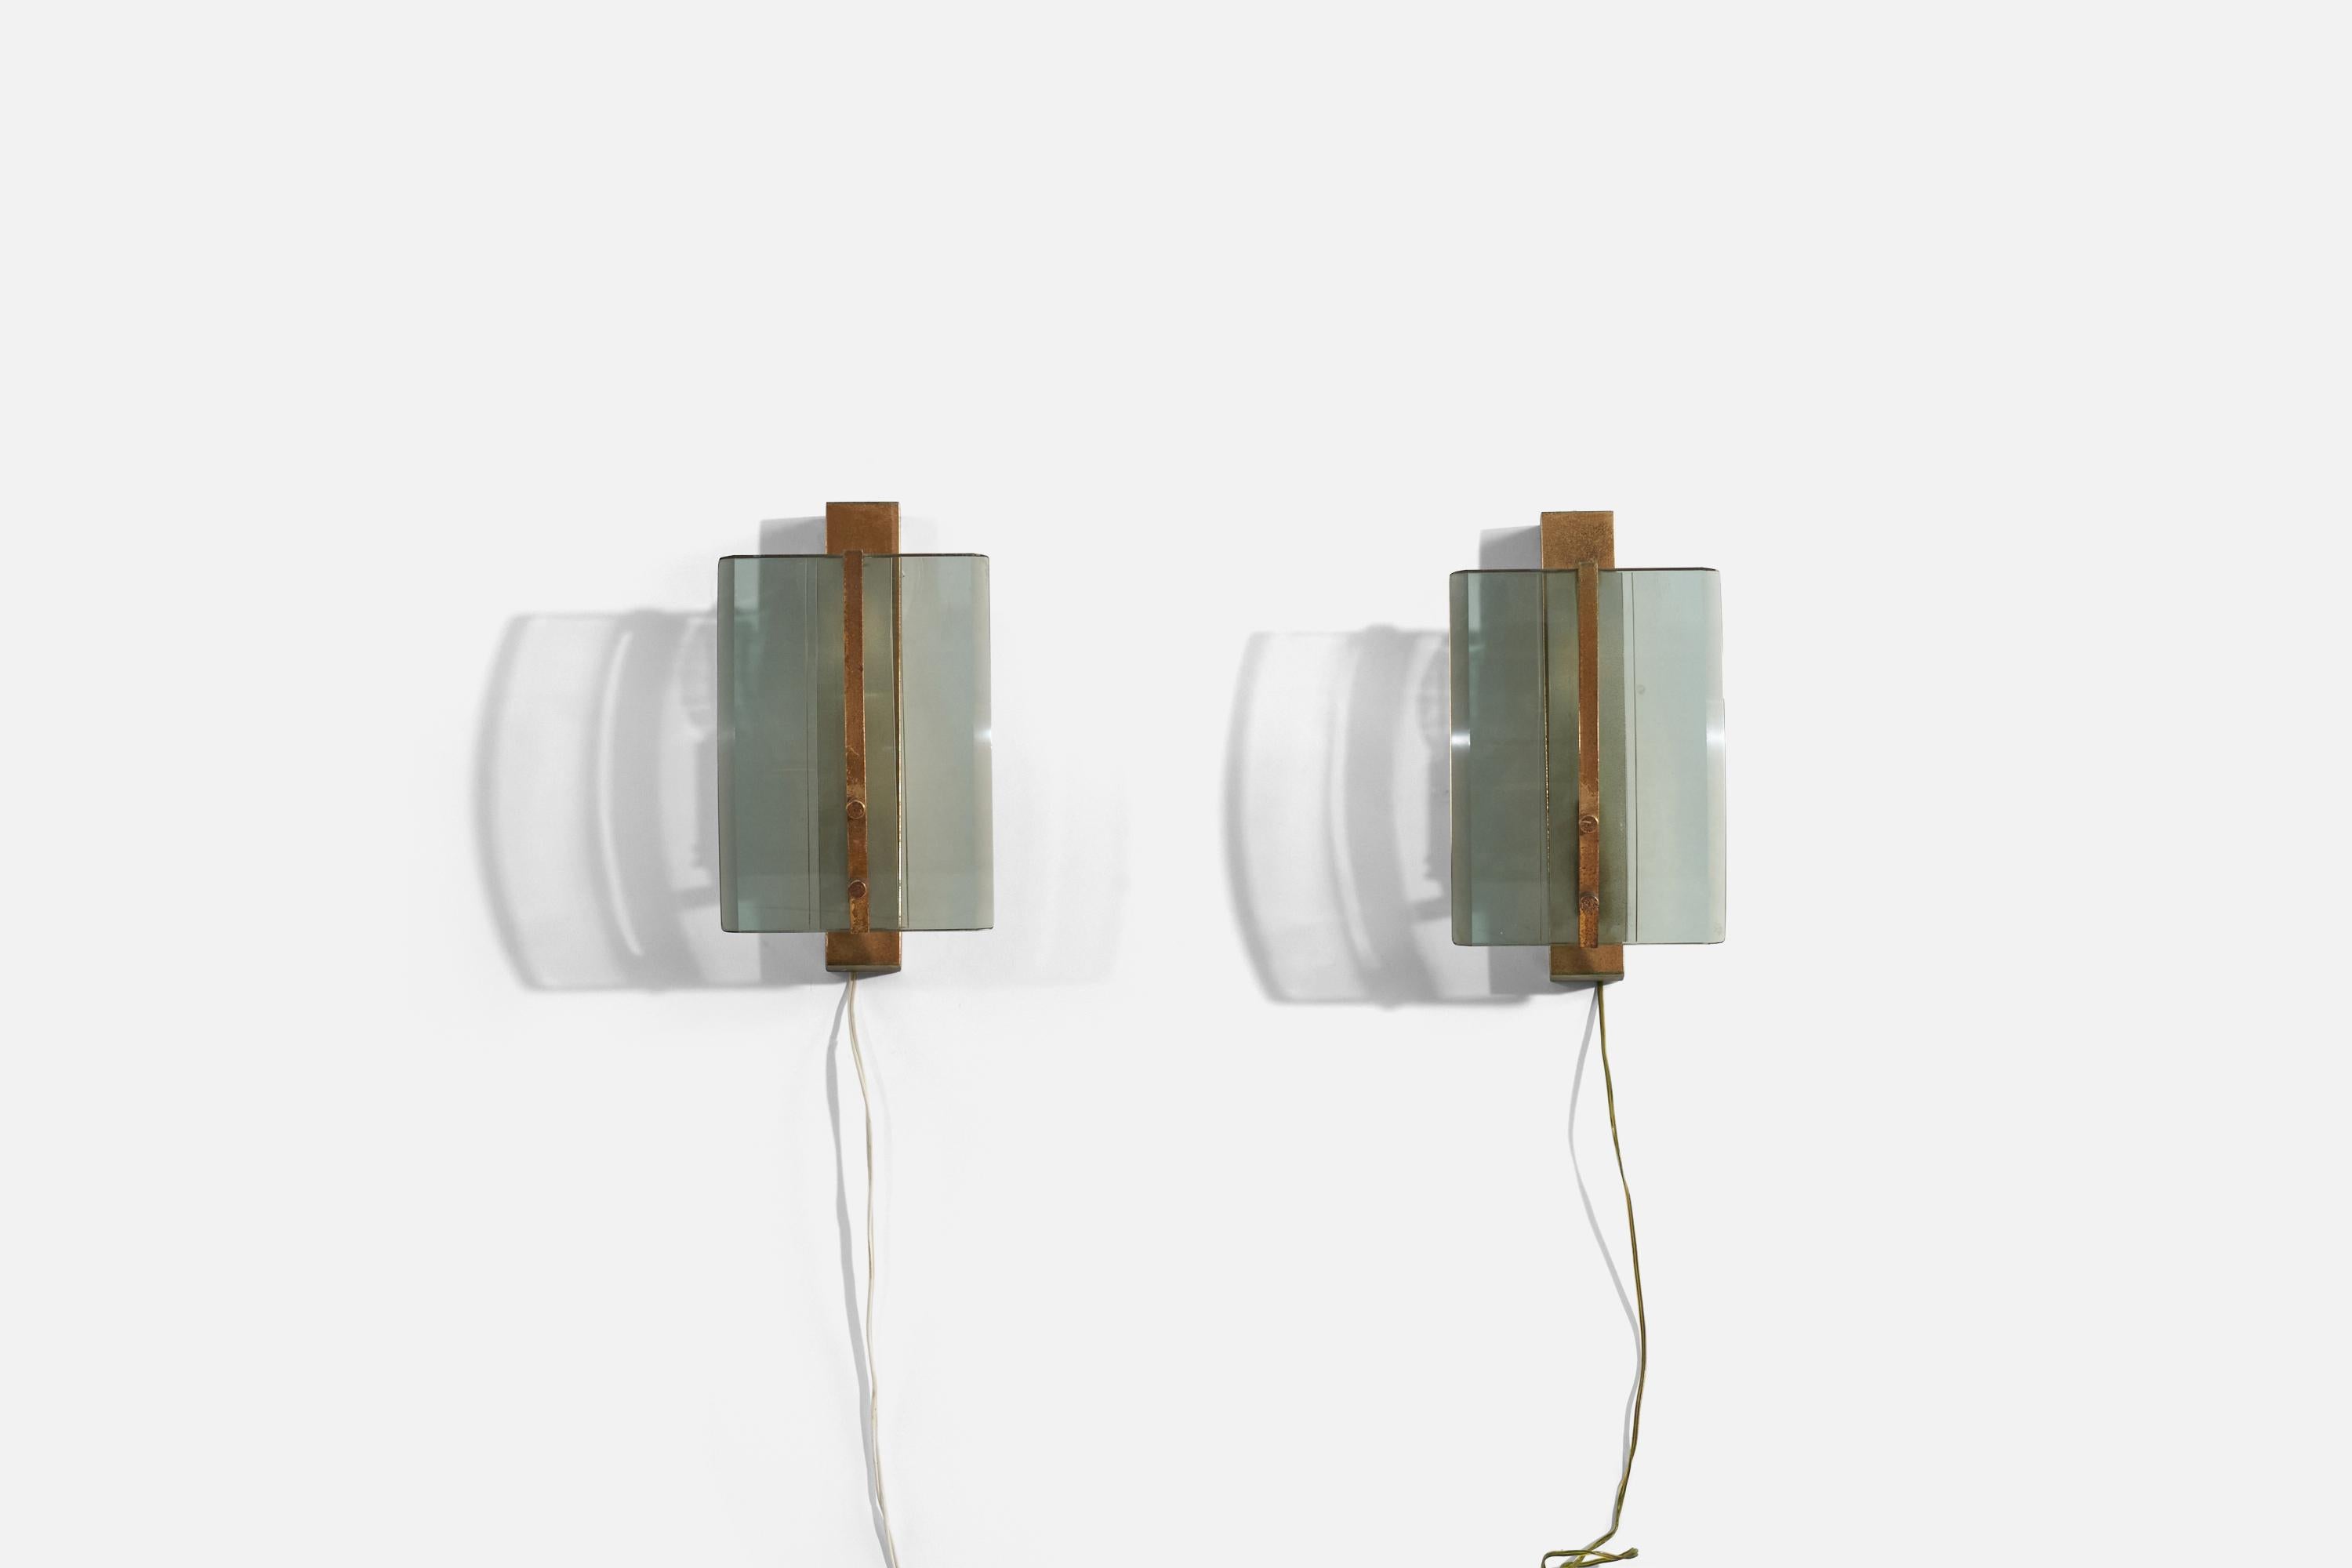 A pair of brass and glass wall lights designed and produced by an Italian designer, Italy, 1960s.

Dimensions of the back plate (inches) : 9.8125 x 1.625 x 1.5625 (H x W x D).